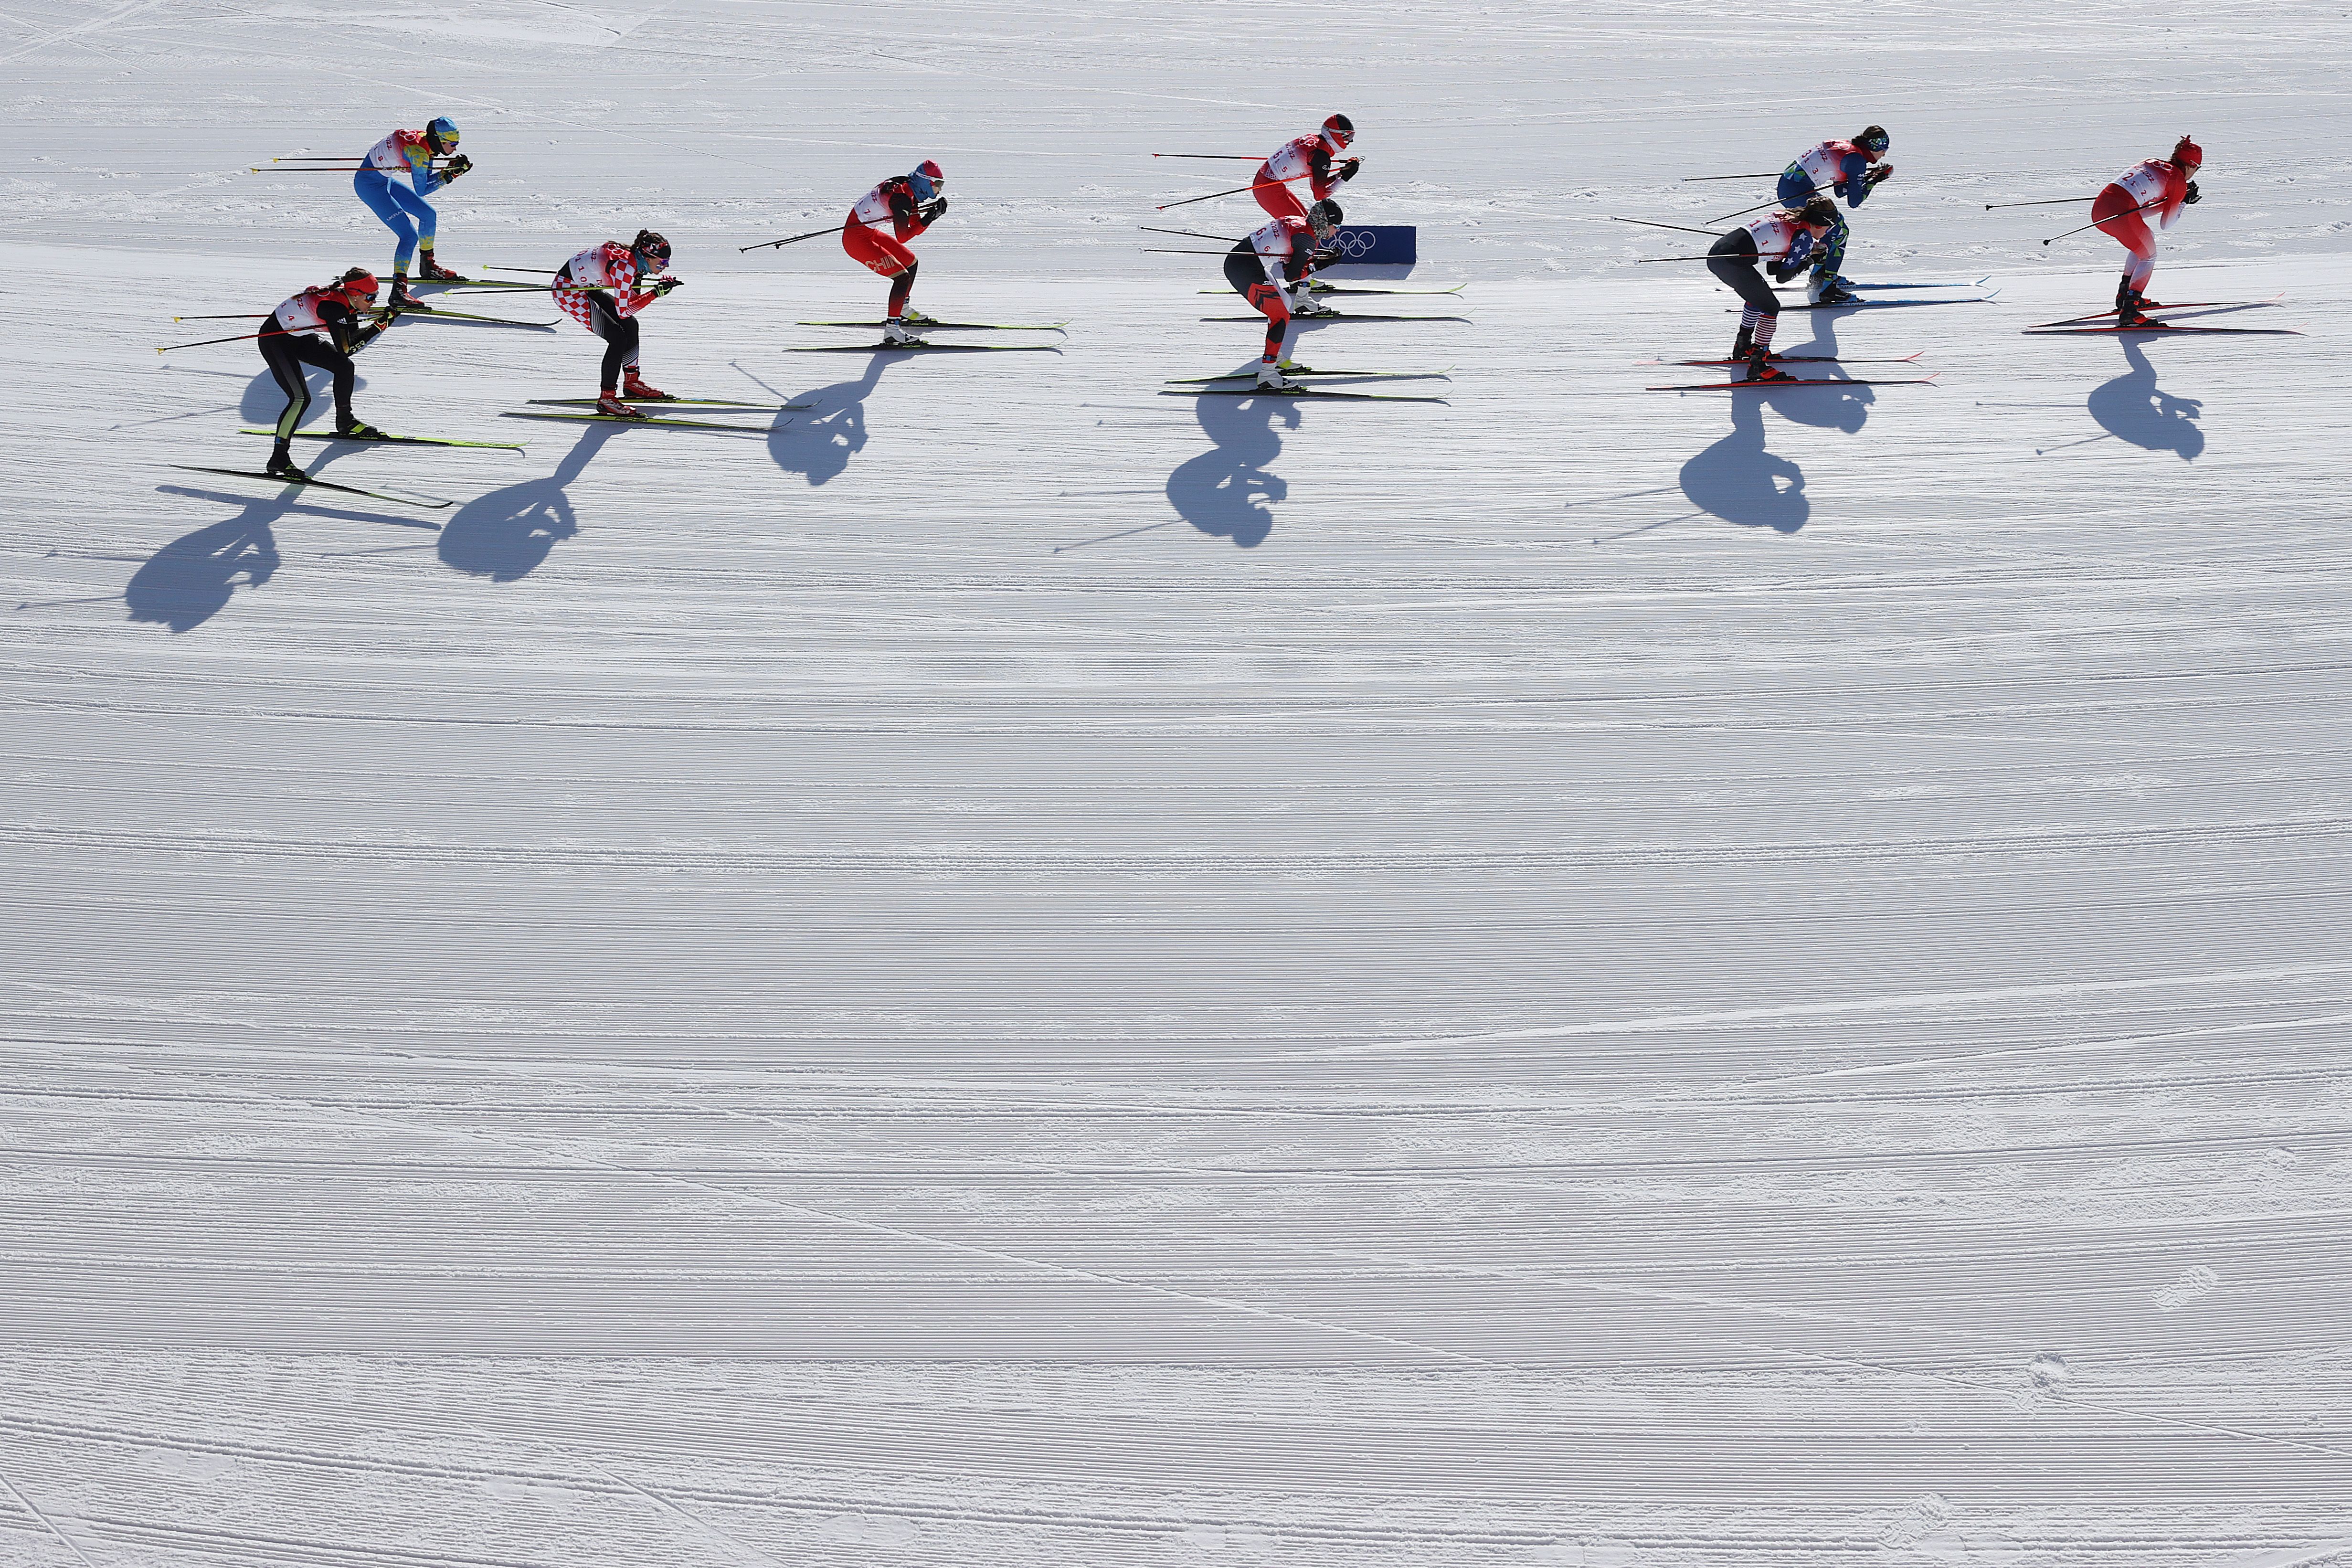 Athletes compete during the Women's Cross-Country Team Sprint Classic Semifinals at the Beijing 2022 Winter Olympics at The National Cross-Country Skiing Centre on February 16.